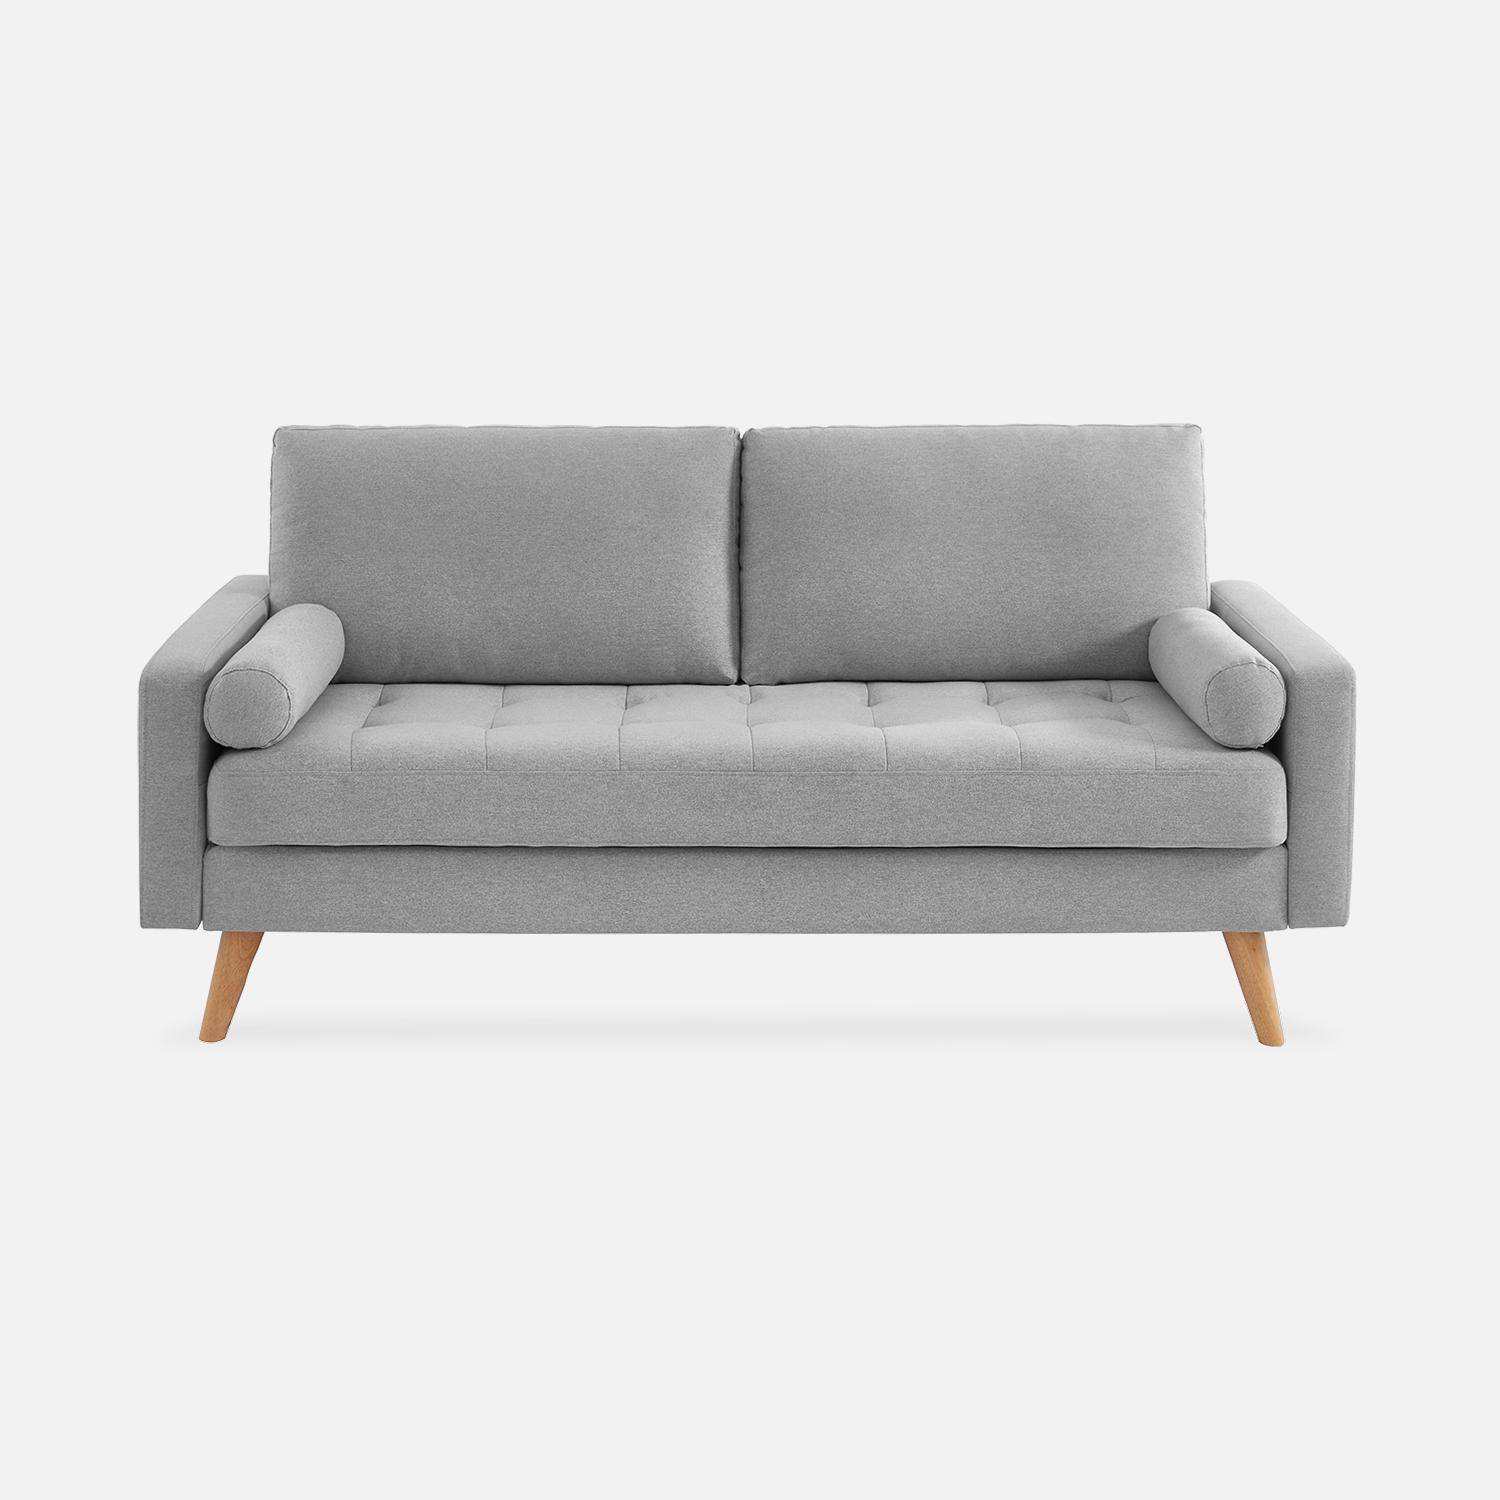 3-seater sofa with Scandi style wooden legs - Ivar - Grey Photo4